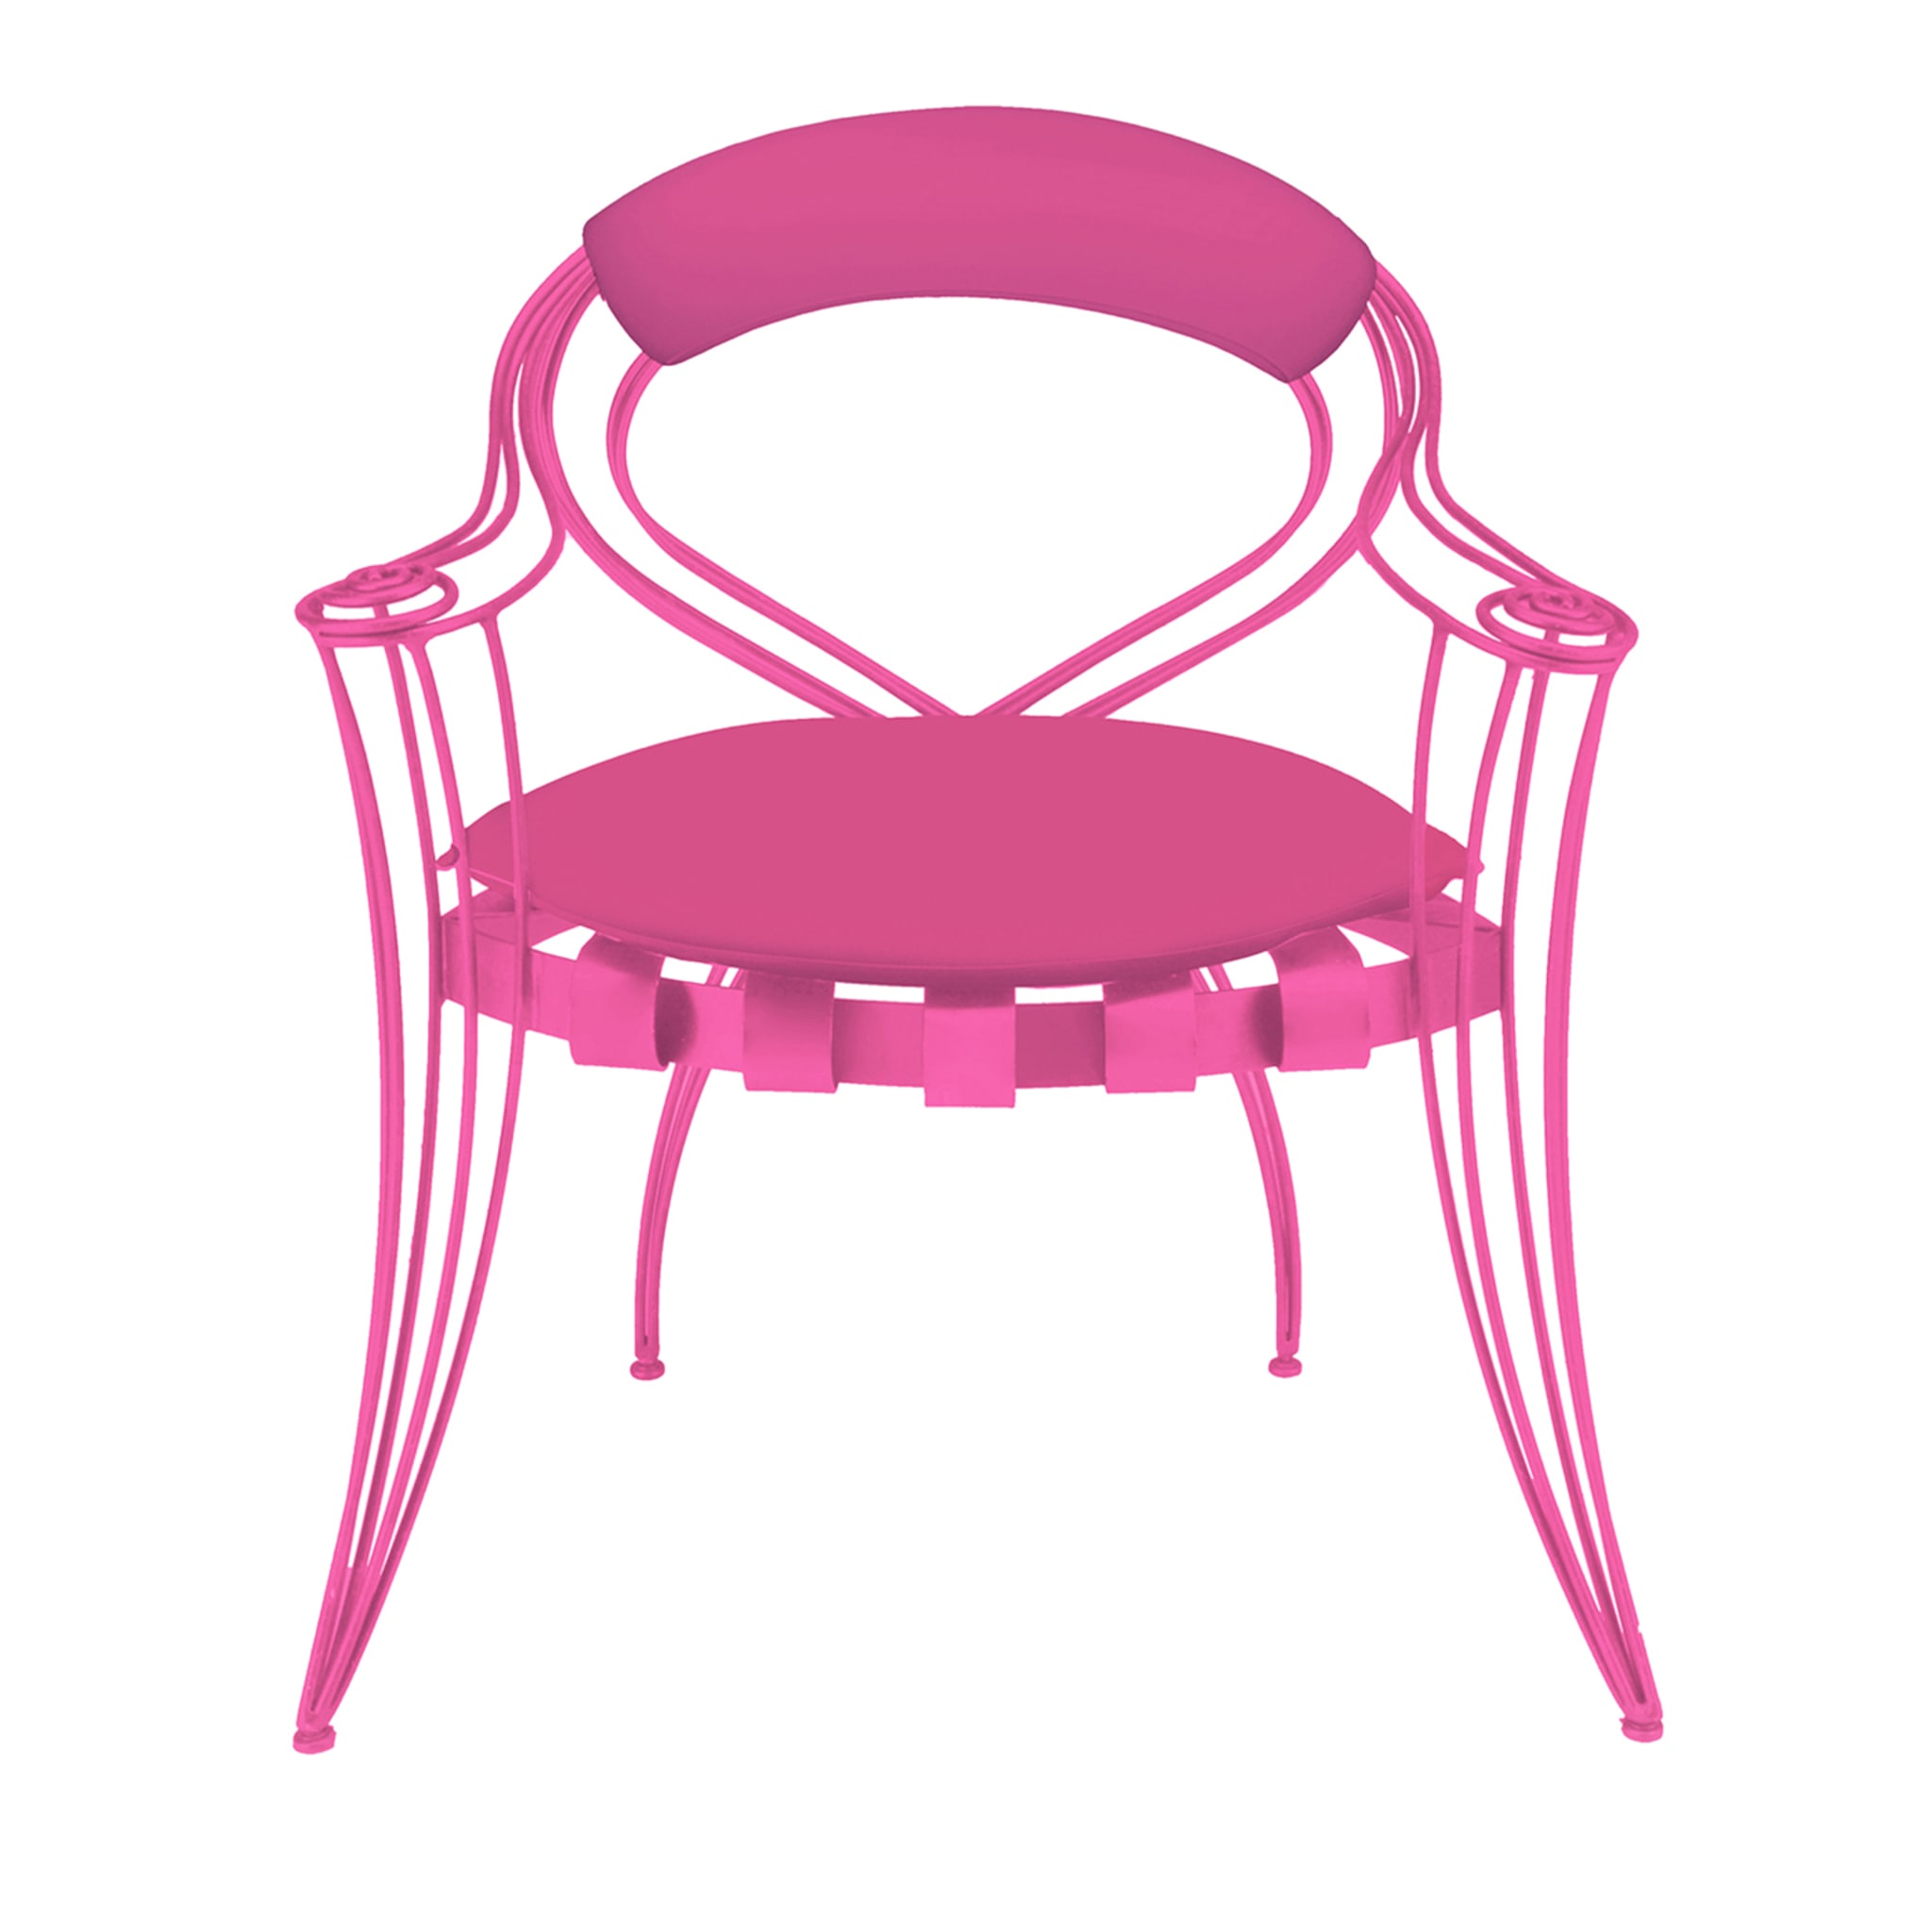 Opus Garden Magenta Chair with Armrests by Carlo Rampazzi - Main view